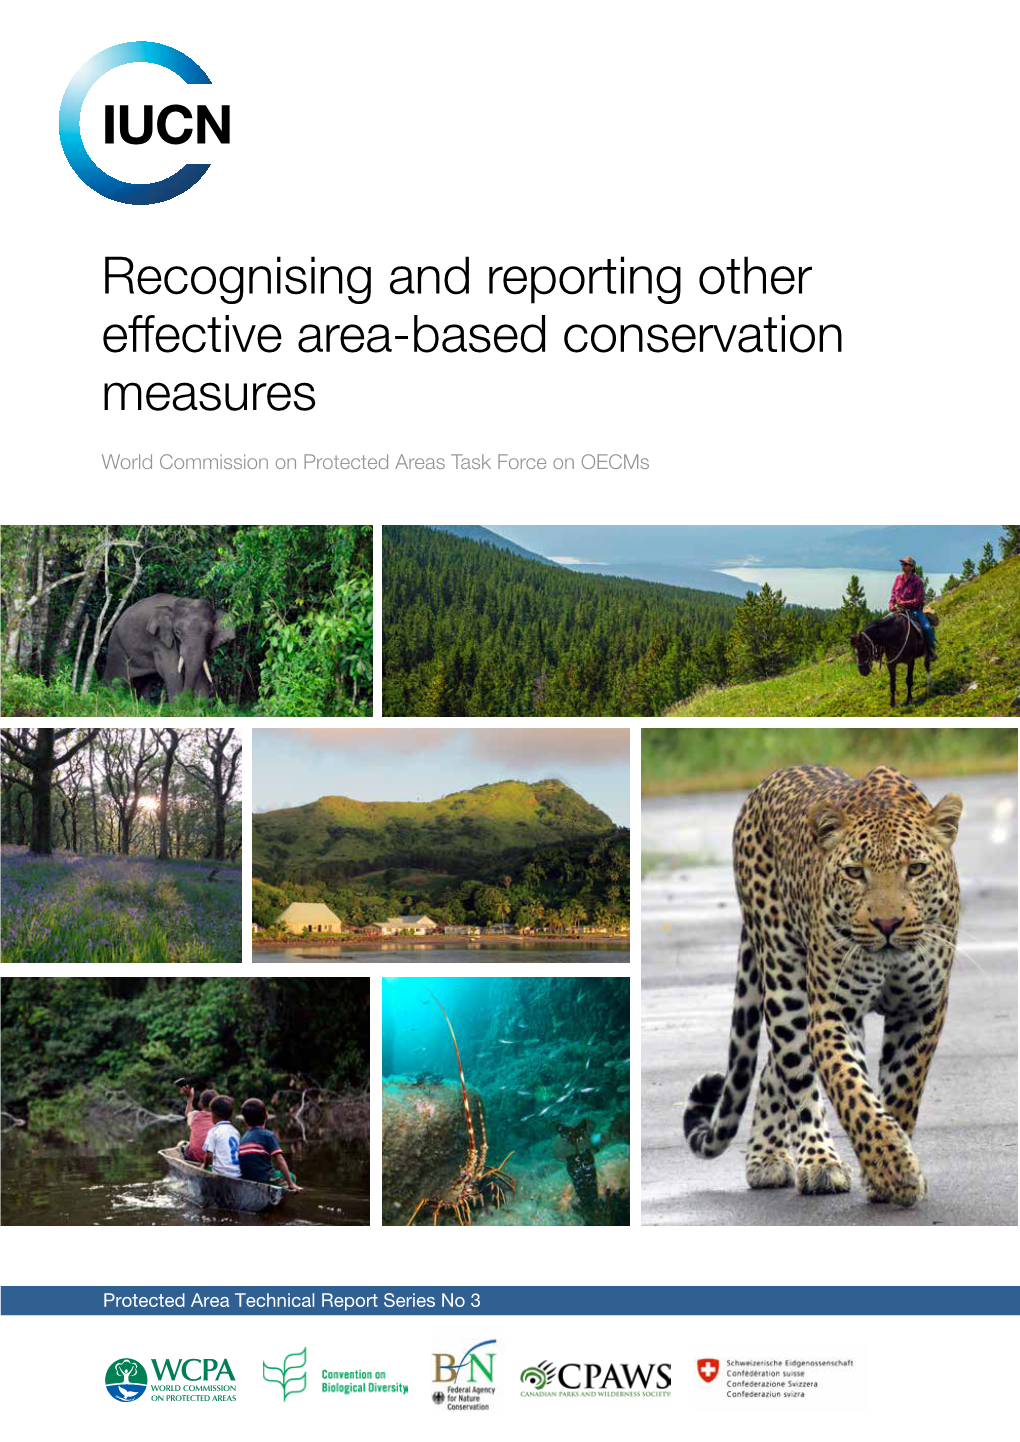 Recognising and Reporting Other Effective Area-Based Conservation Measures